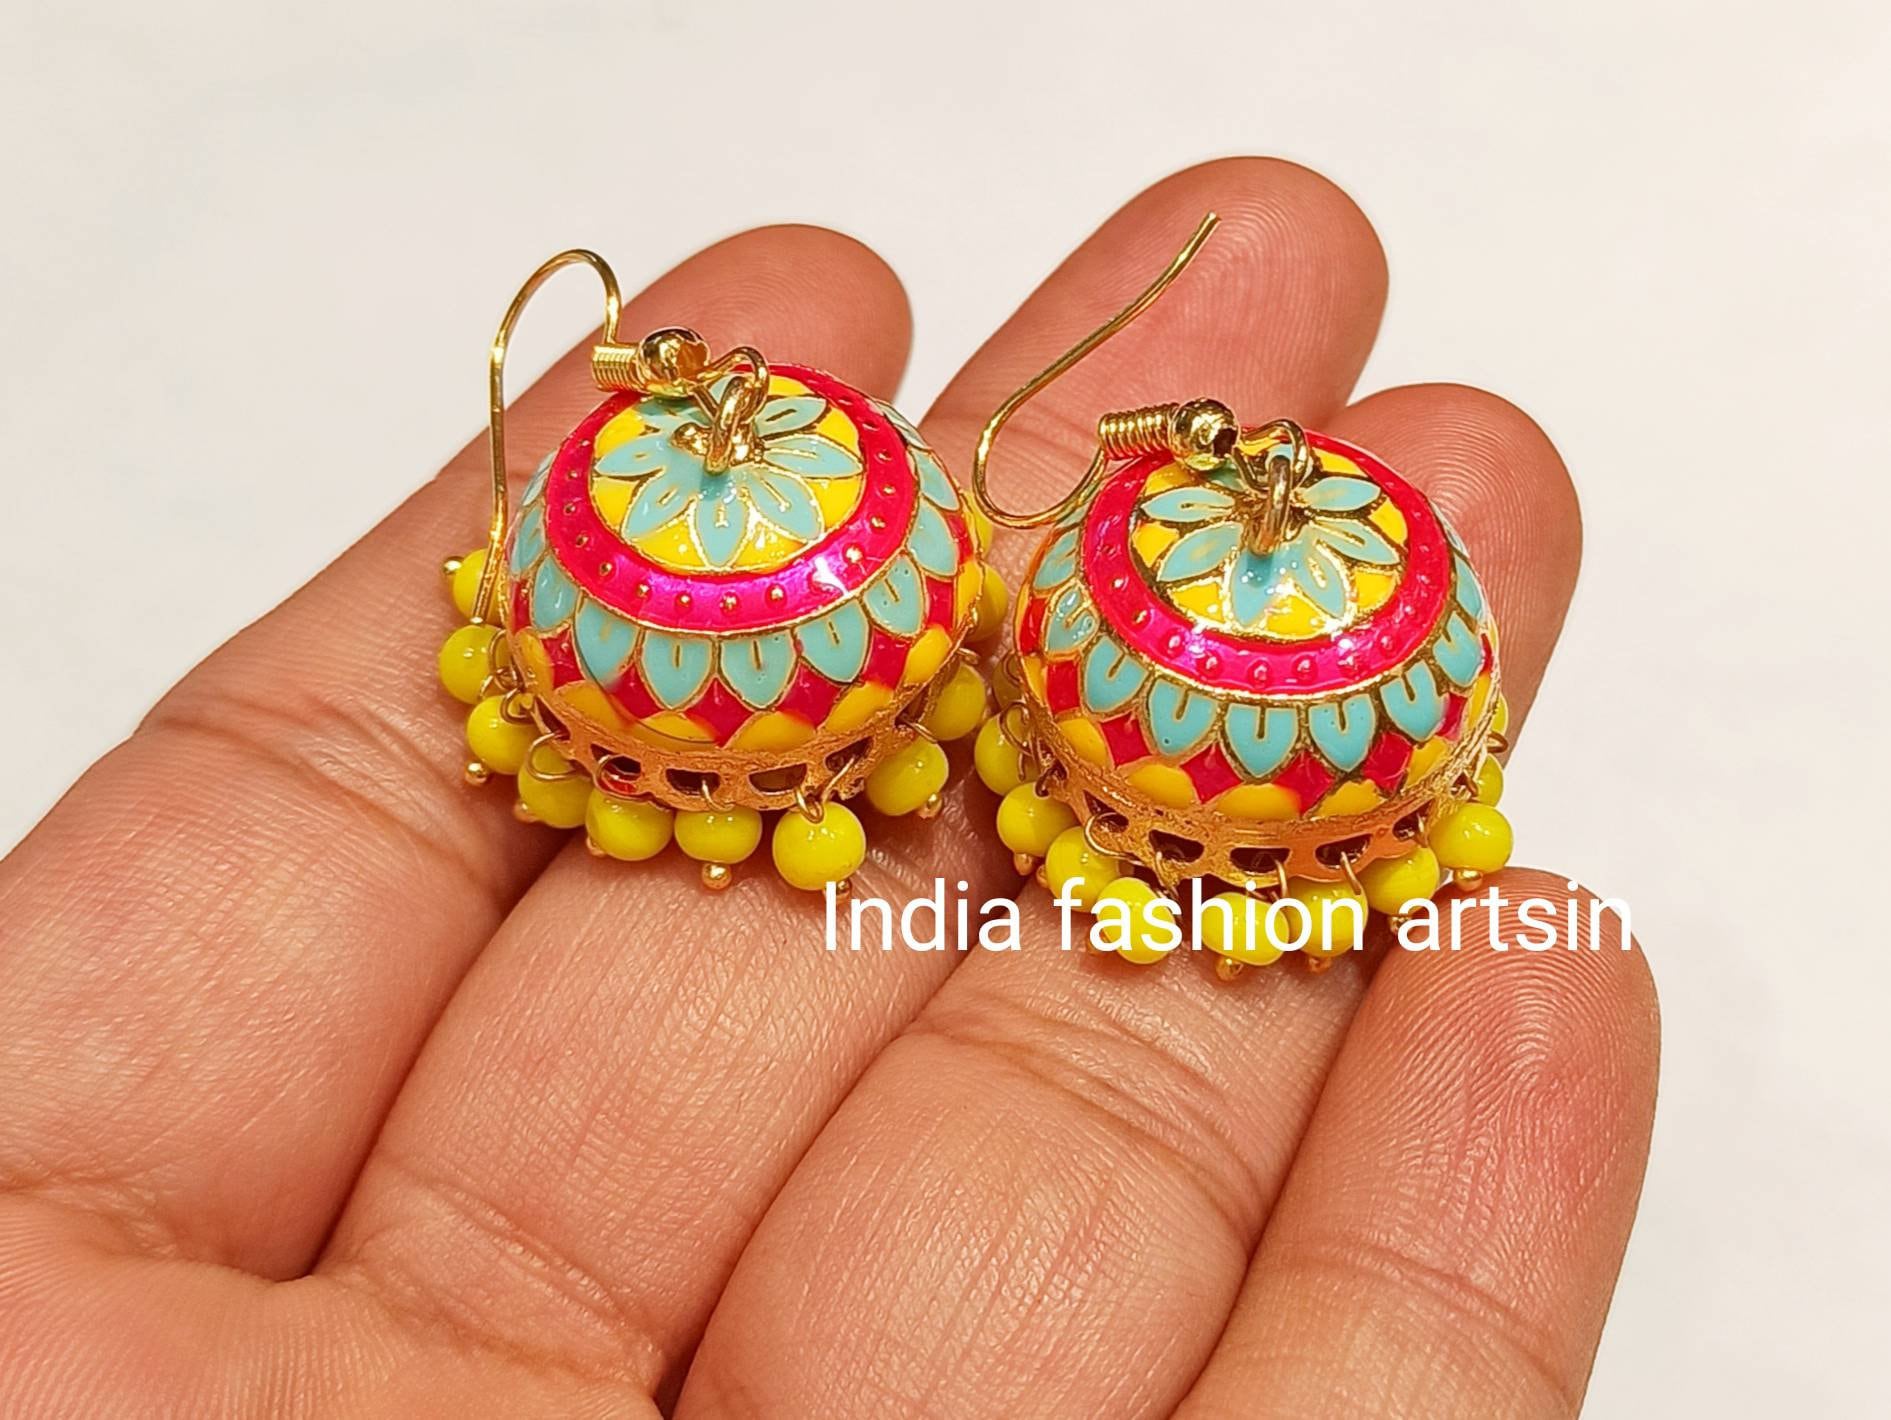 Details more than 168 quilling paper jhumka earring designs best